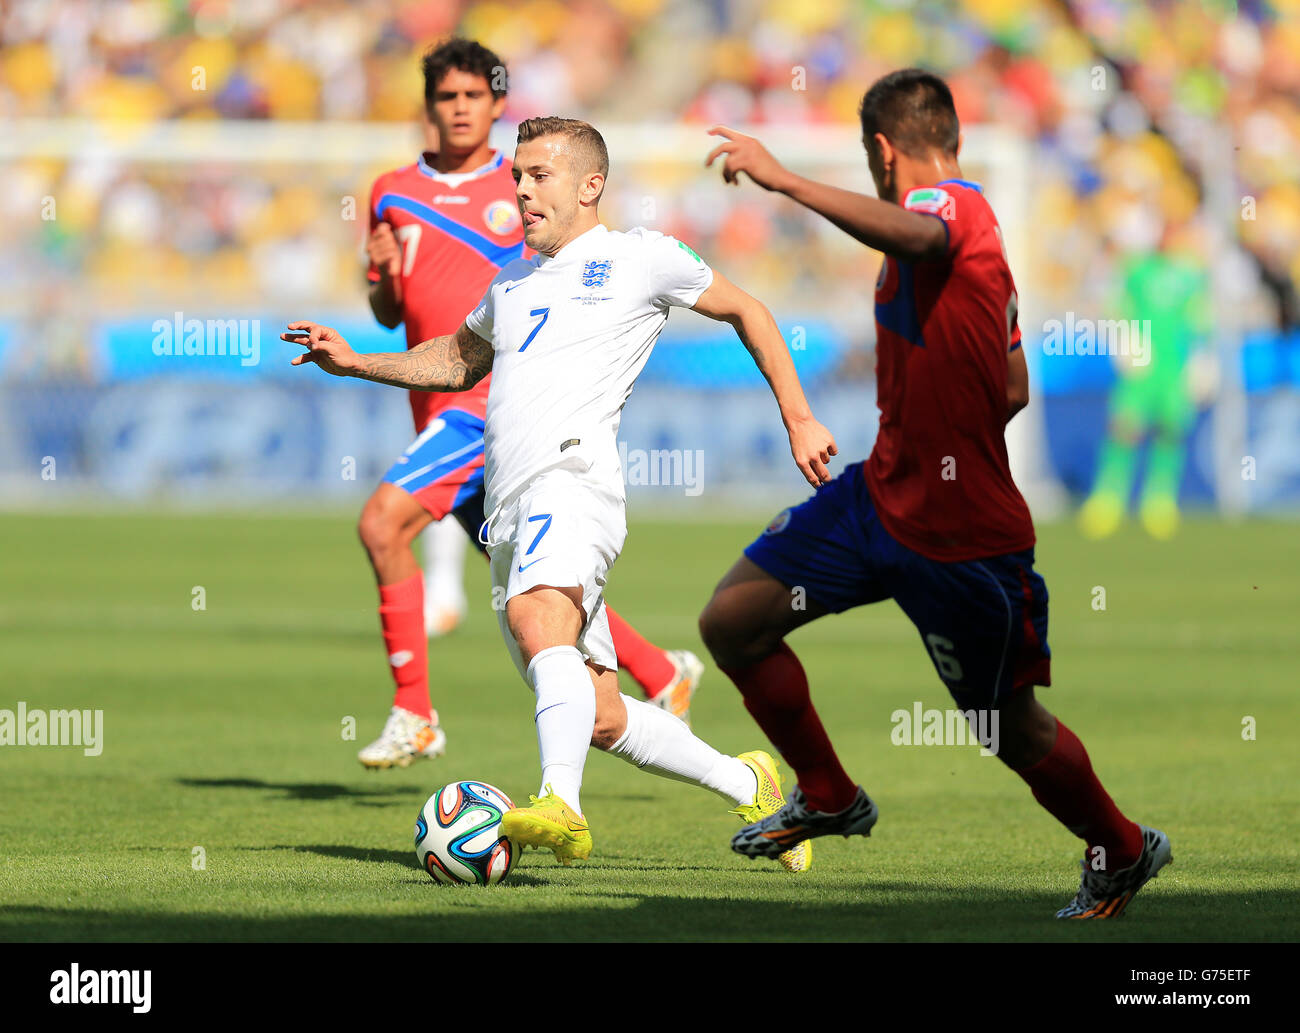 England's Jack Wilshere gets away from Costa Rica's Cristian Gamboa (right) as they battle for the ball during the FIFA World Cup, Group D match at the Estadio Mineirao, Belo Horizonte, Brazil. Stock Photo